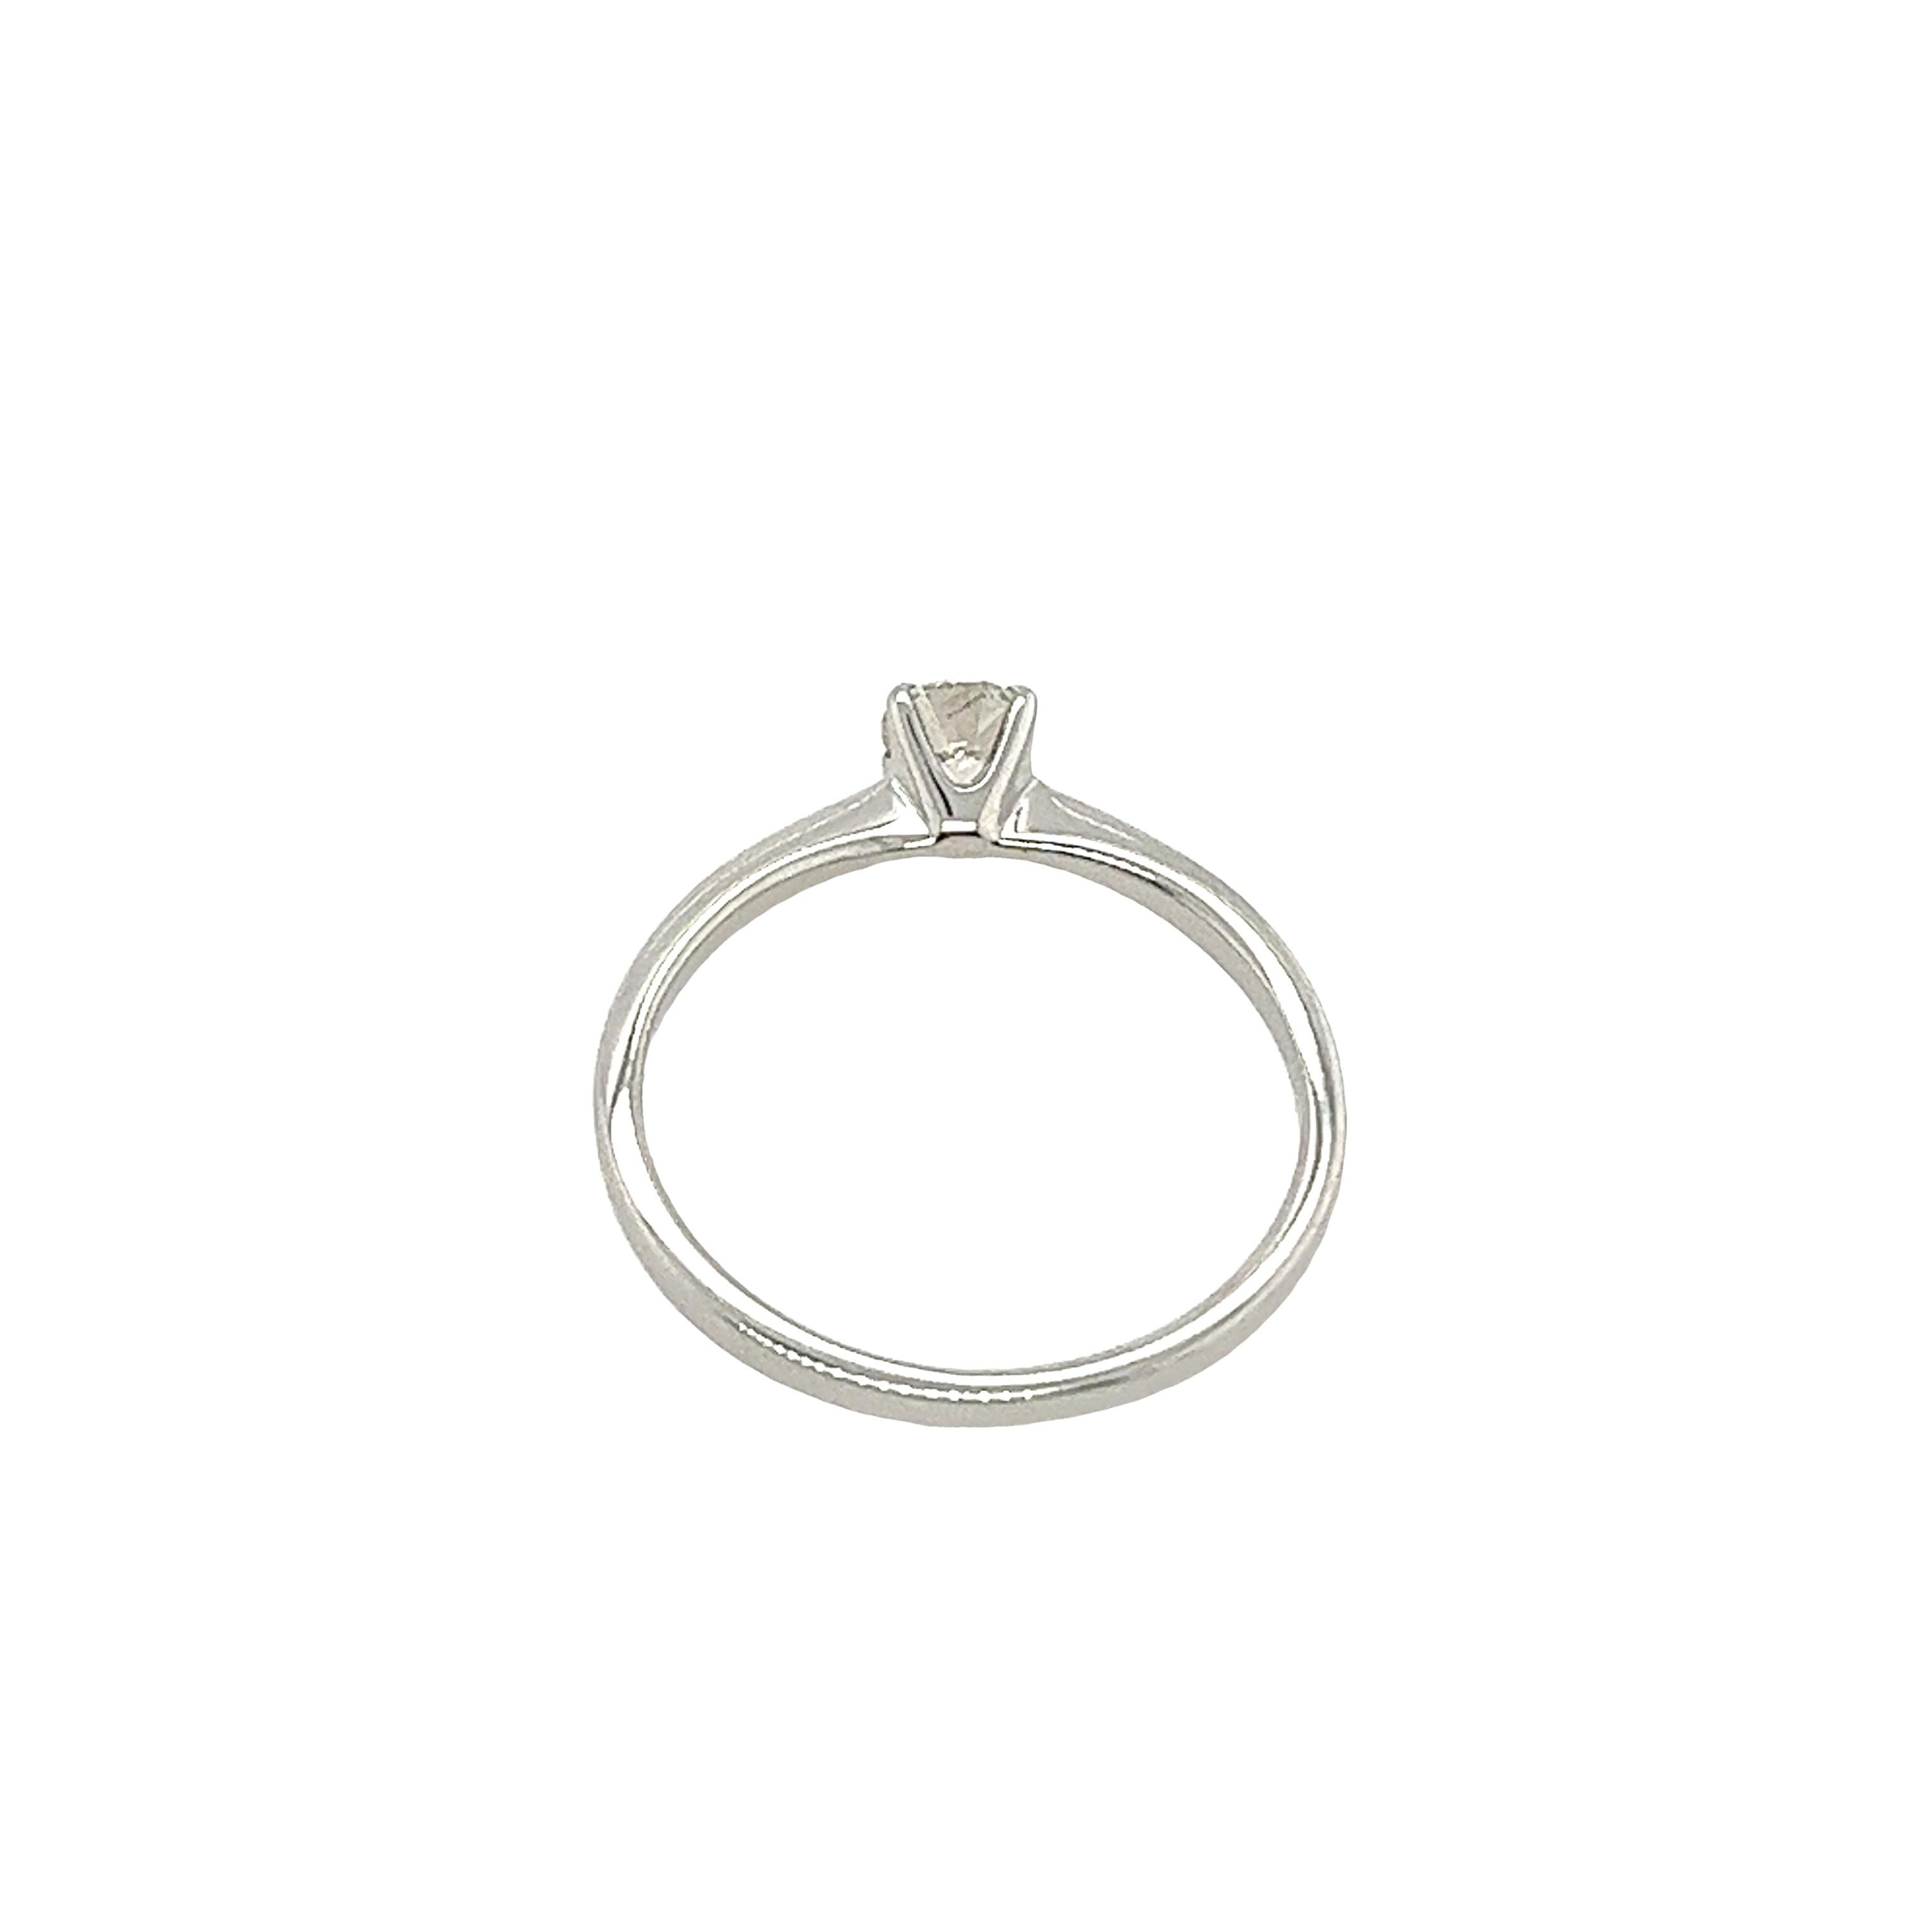 18ct White Gold Diamond Solitaire Ring Set With 0.31ct E/SI1 For Sale 3